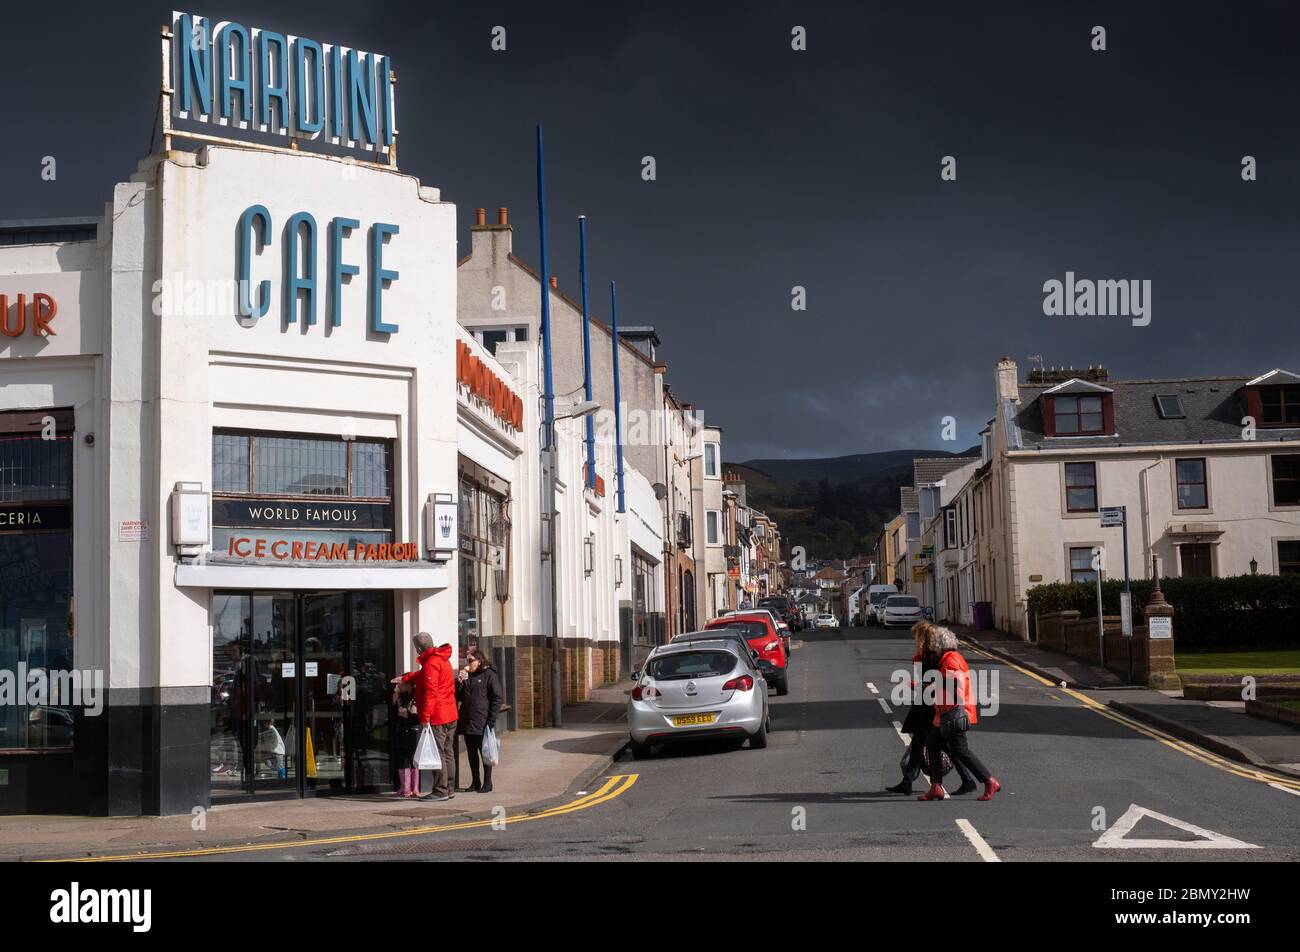 Nardini's Cafe, Restaurant and Ice Cream parlour in Largs. Stock Photo